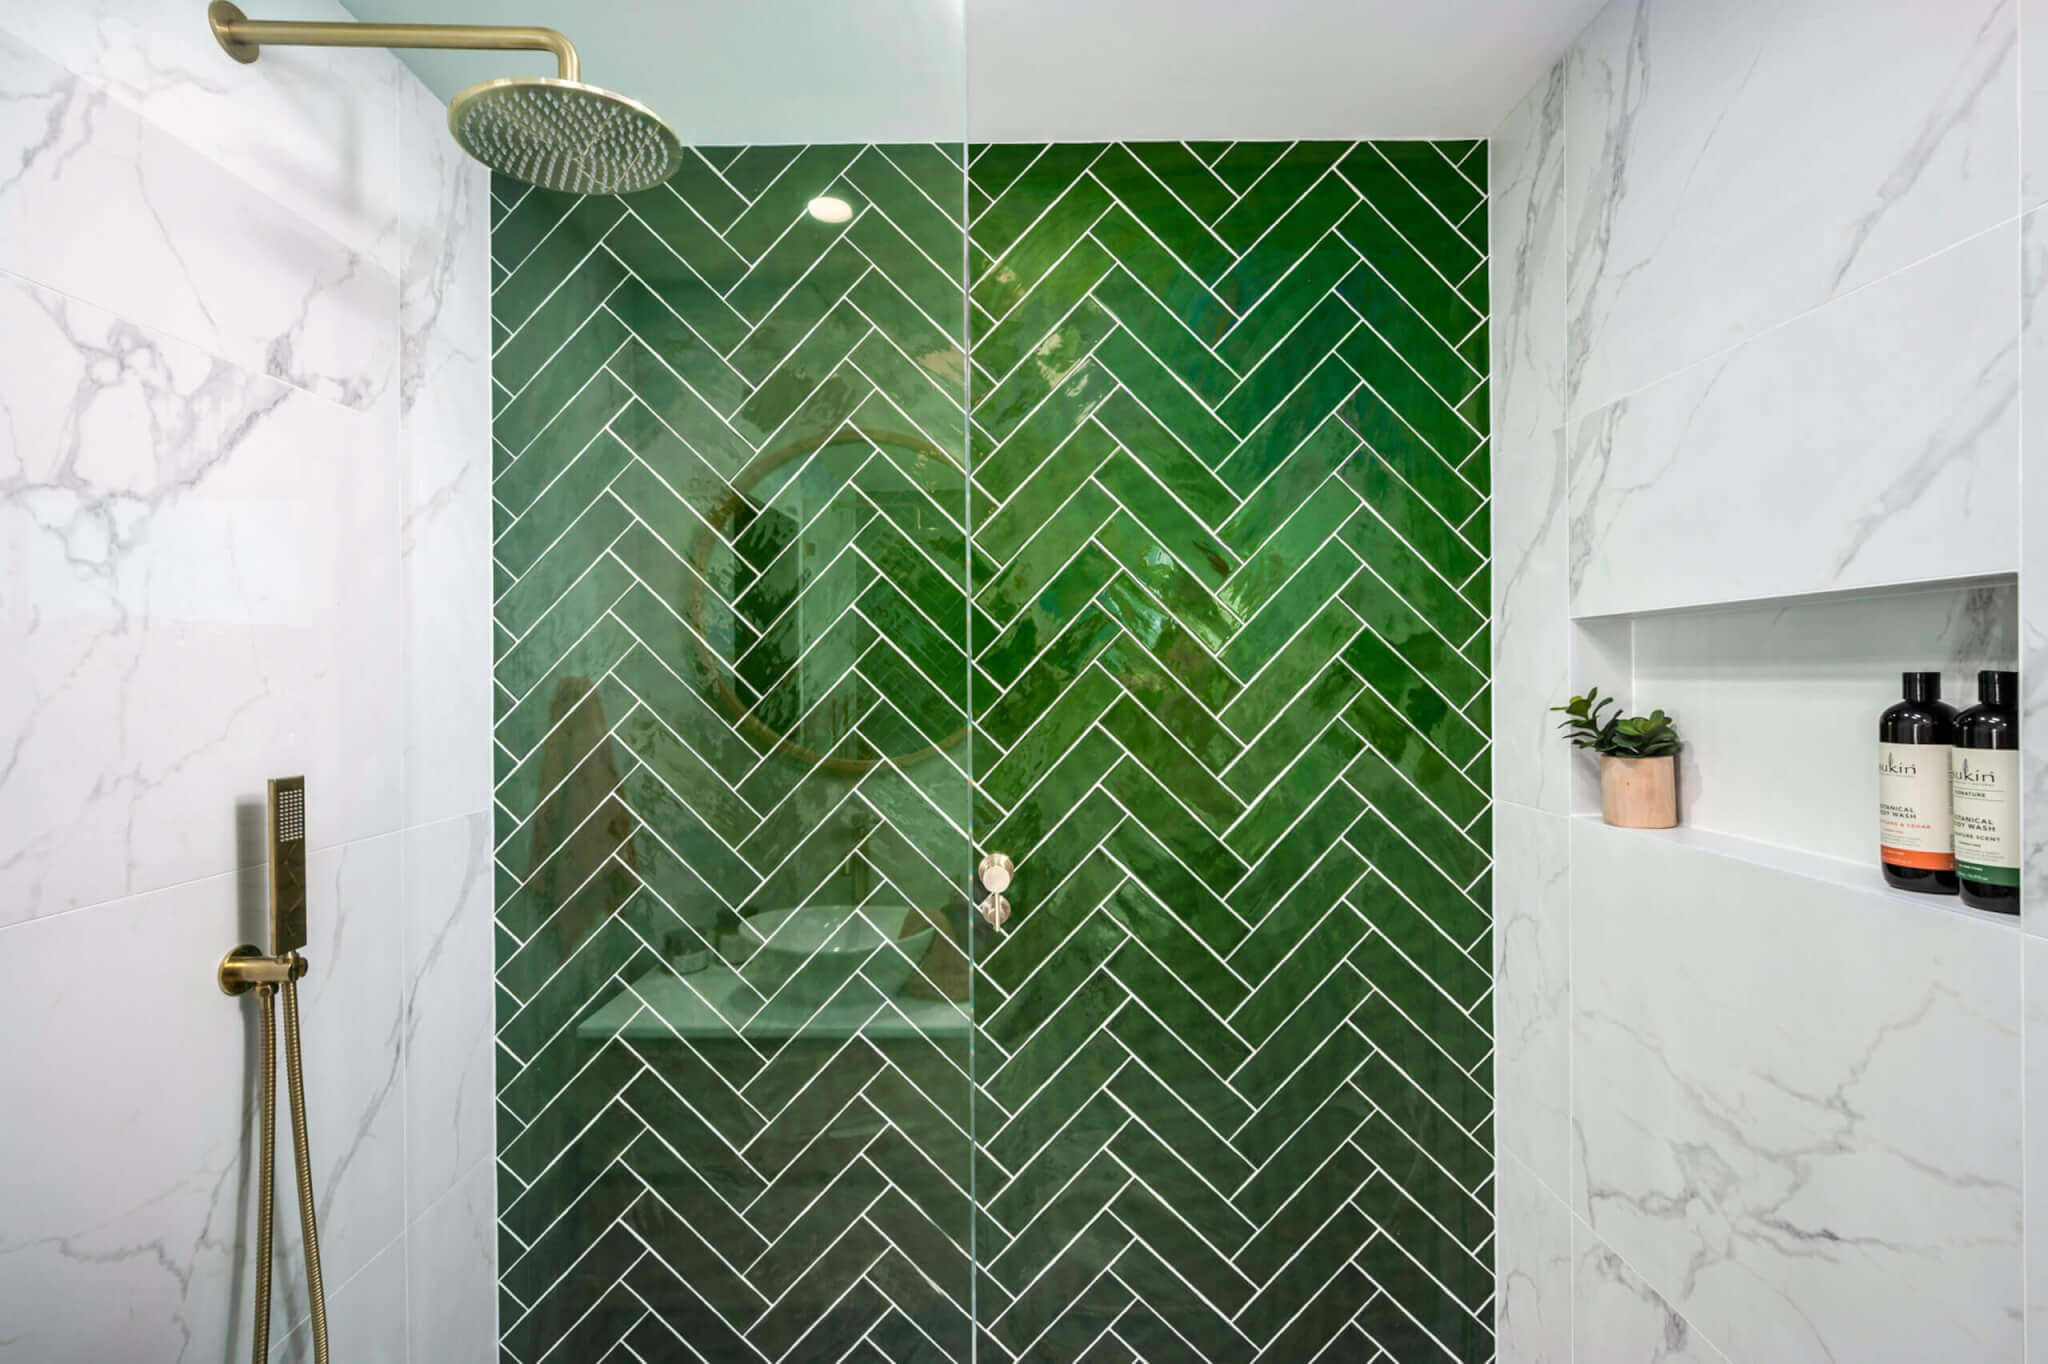 bath and shower are merged into one giant, tiled area